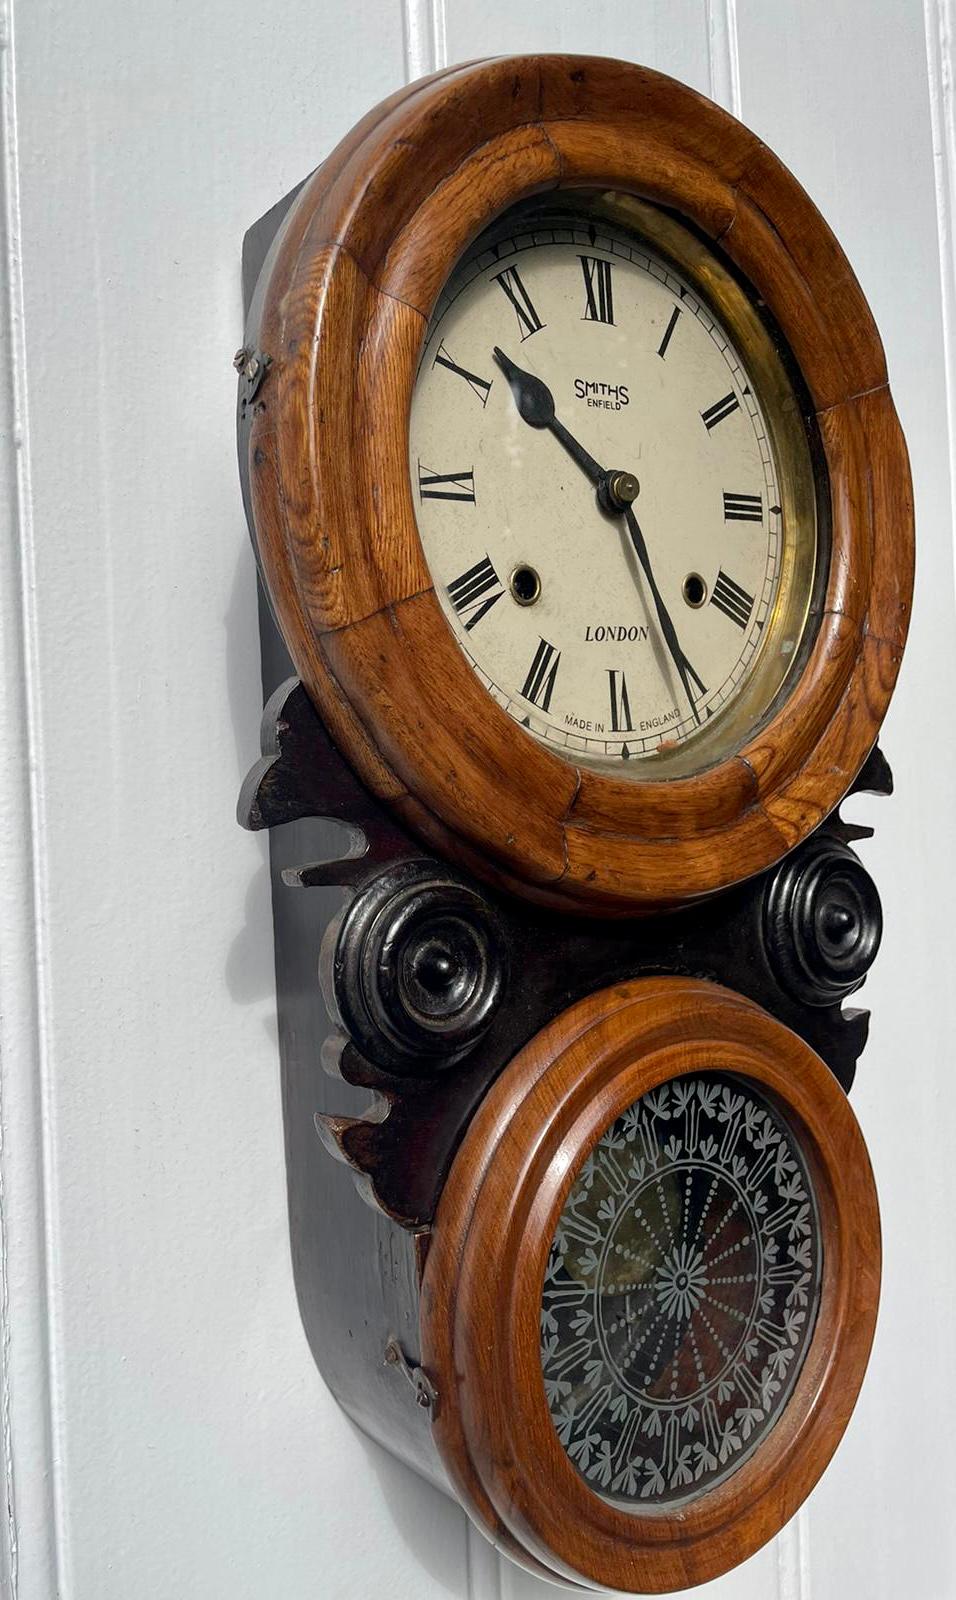 Unusual antique Victorian walnut and ebonised wall clock having a round painted dial with an eight day movement striking on the hour and half hour, unusual shaped case with two round moulded doors and a shaped ebonised supports. 

Measures: H 49cm